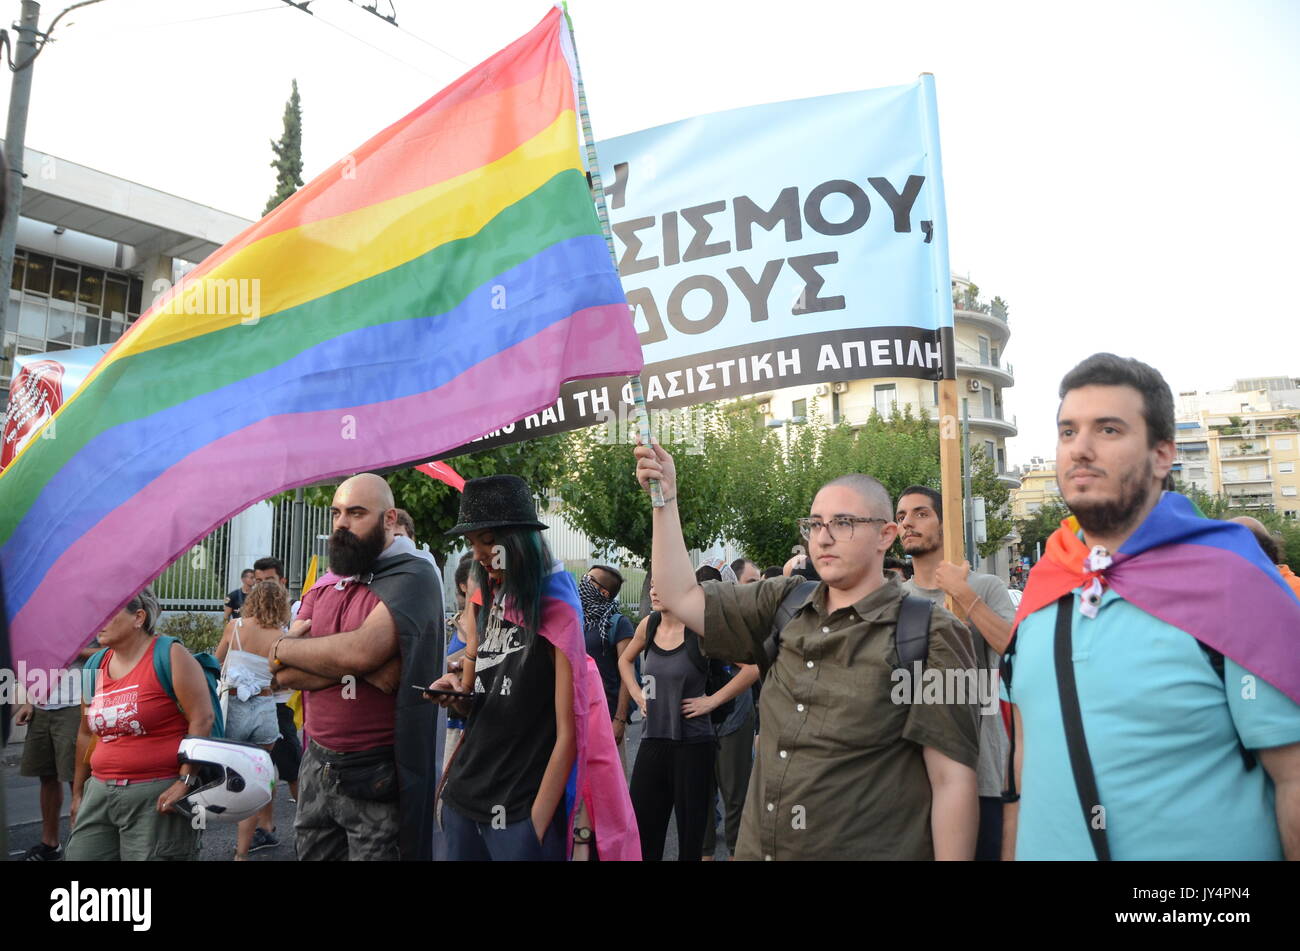 Athens, Greece. 17th Aug, 2017. KEERFA (Movement against Racism And Fascist Threat) activists demonstrate in fron of the American Embassy in Athens is support of Heather Heyer that lost her life during classes in Charlottesville Usa. Demonstrators shouted slogans against KKK, white supermascists and neonazis. Credit: George Panagakis/Pacific Press/Alamy Live News Stock Photo